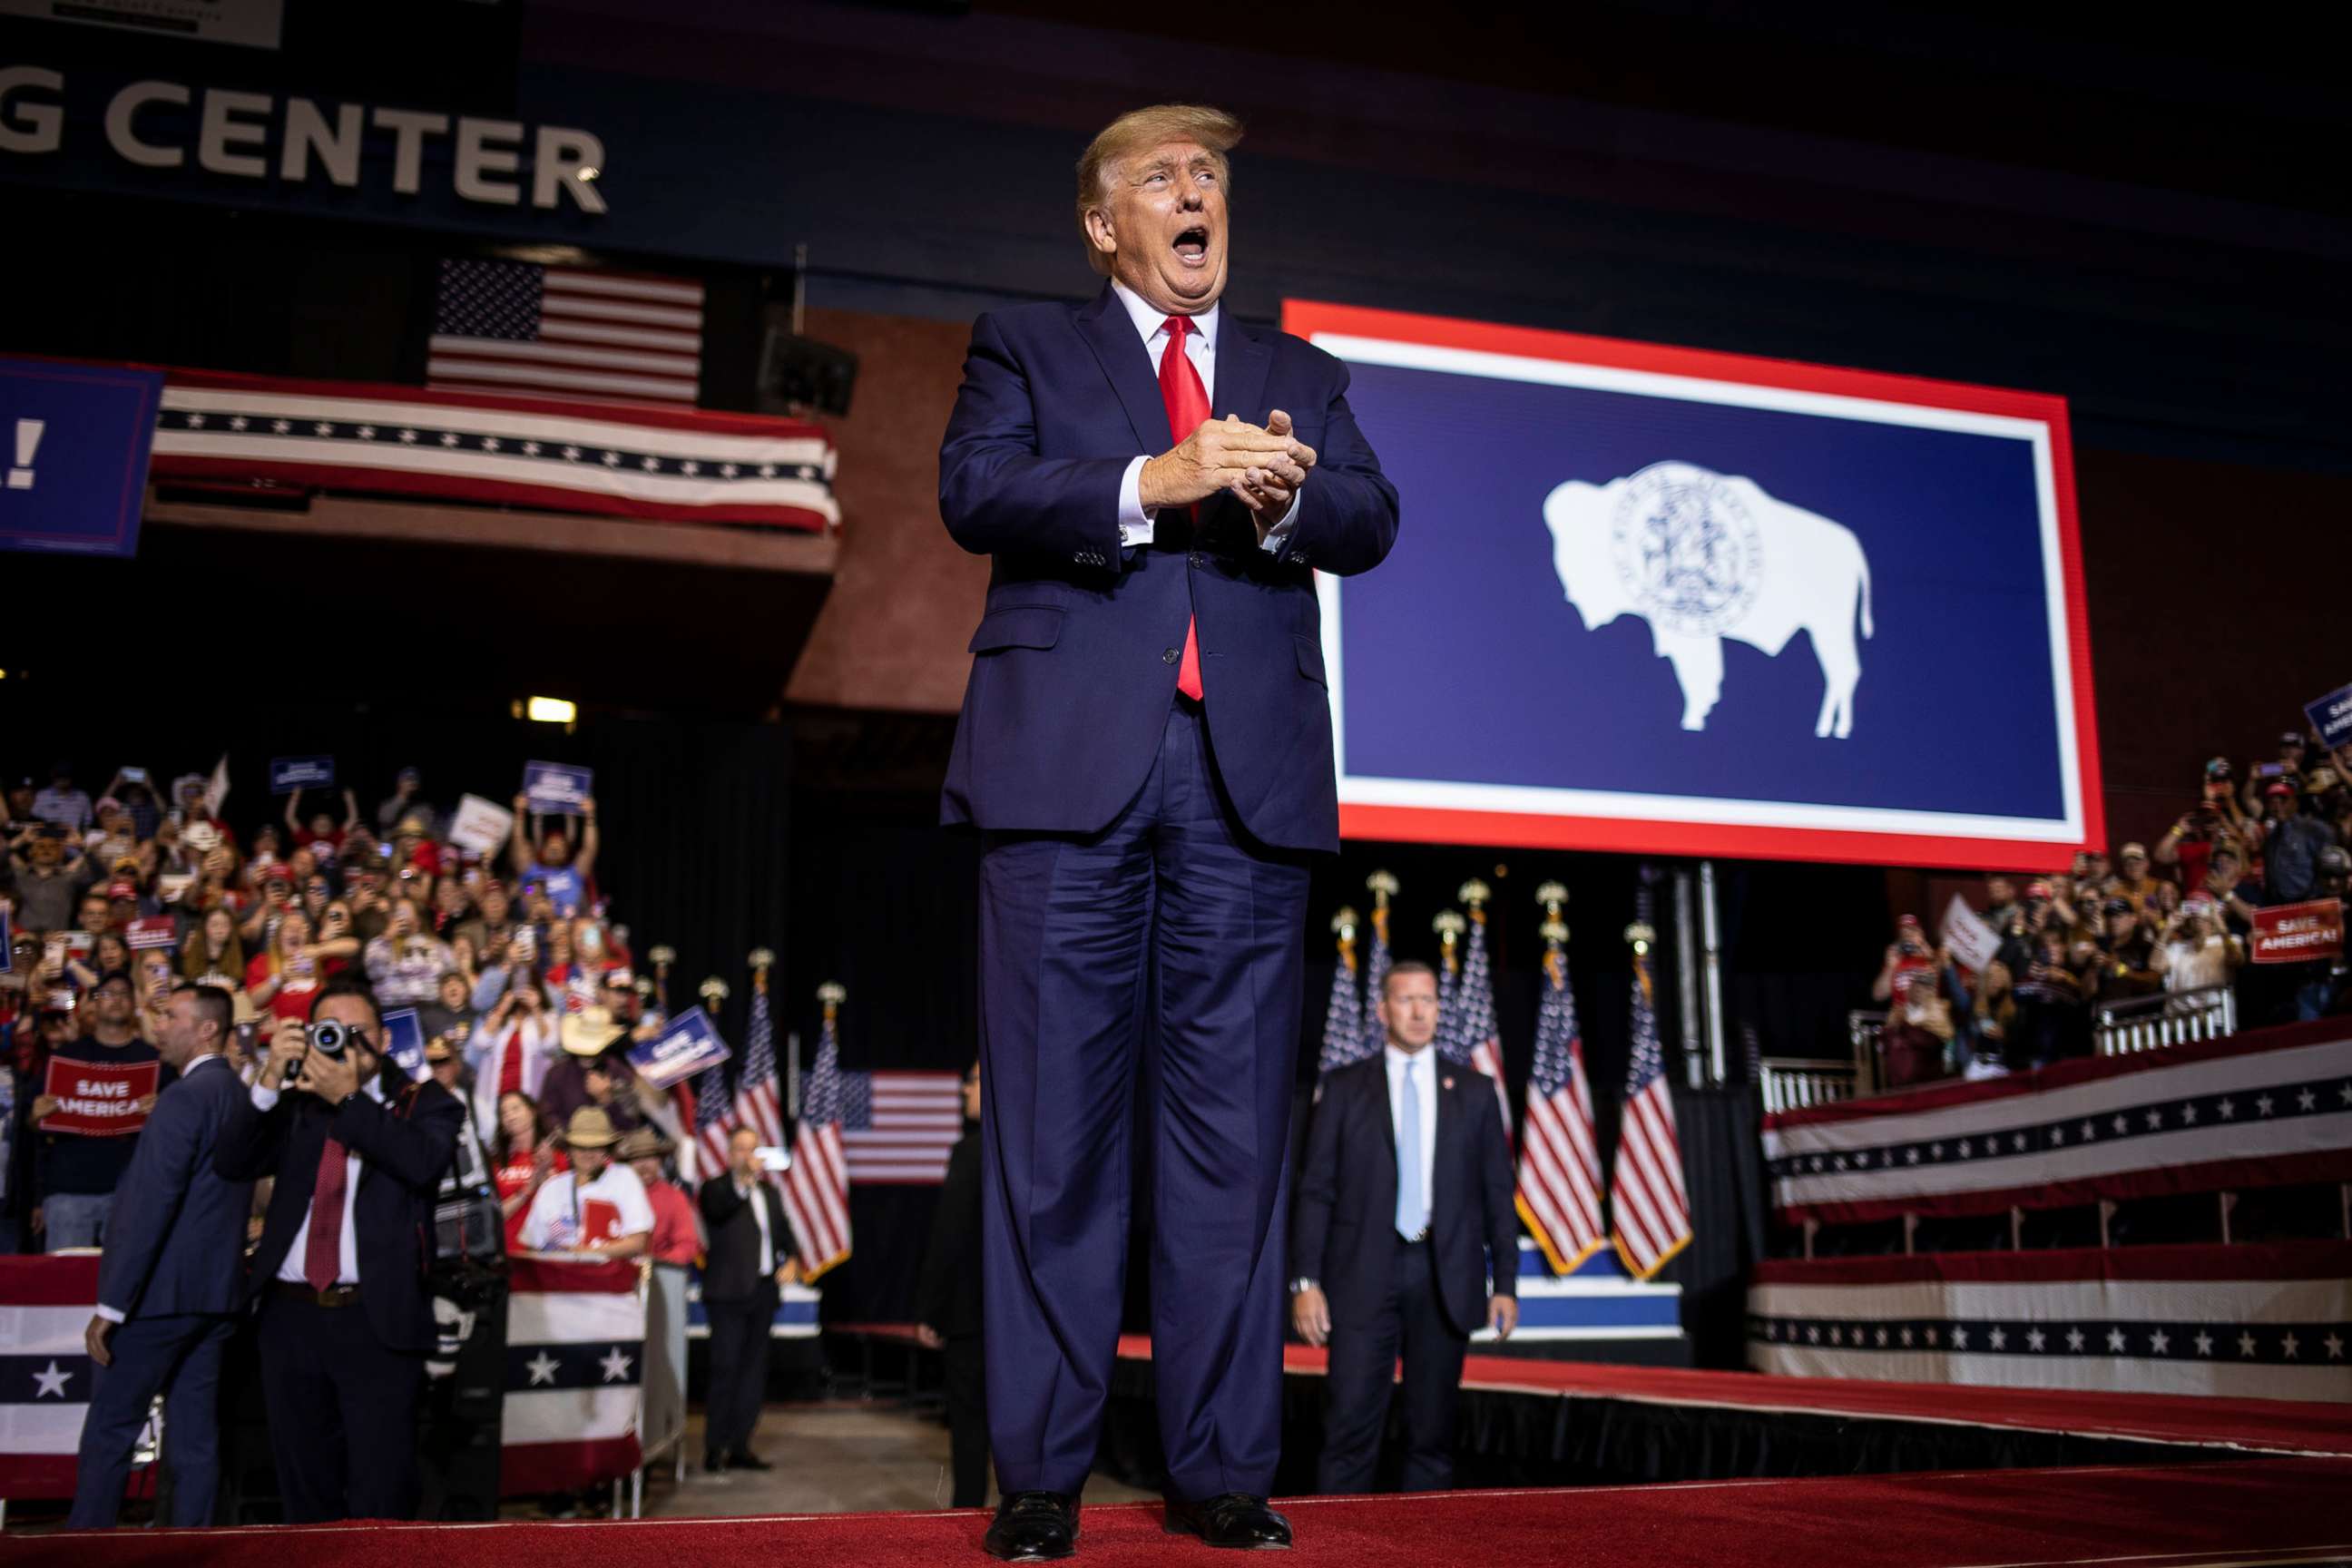 PHOTO: Former President Donald Trump arrives to speak at a rally in Casper, Wyo., May 28, 2022.